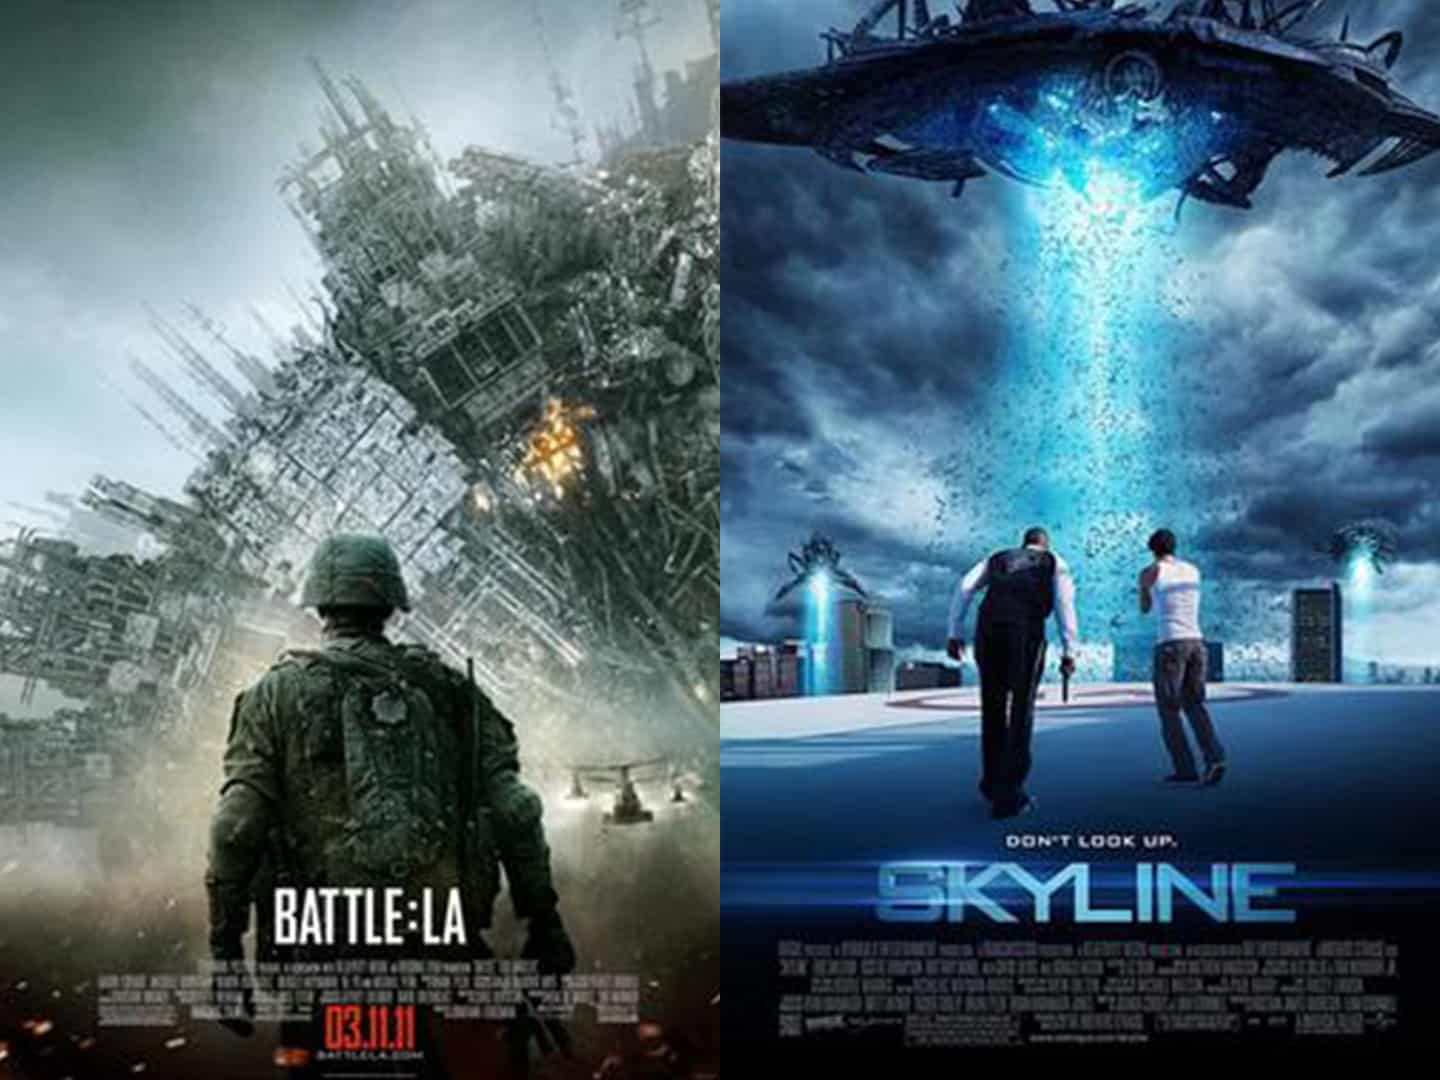 movie posters, movies, movie, films, same movie same year, repeats, hollywood, twitter thread, twitter